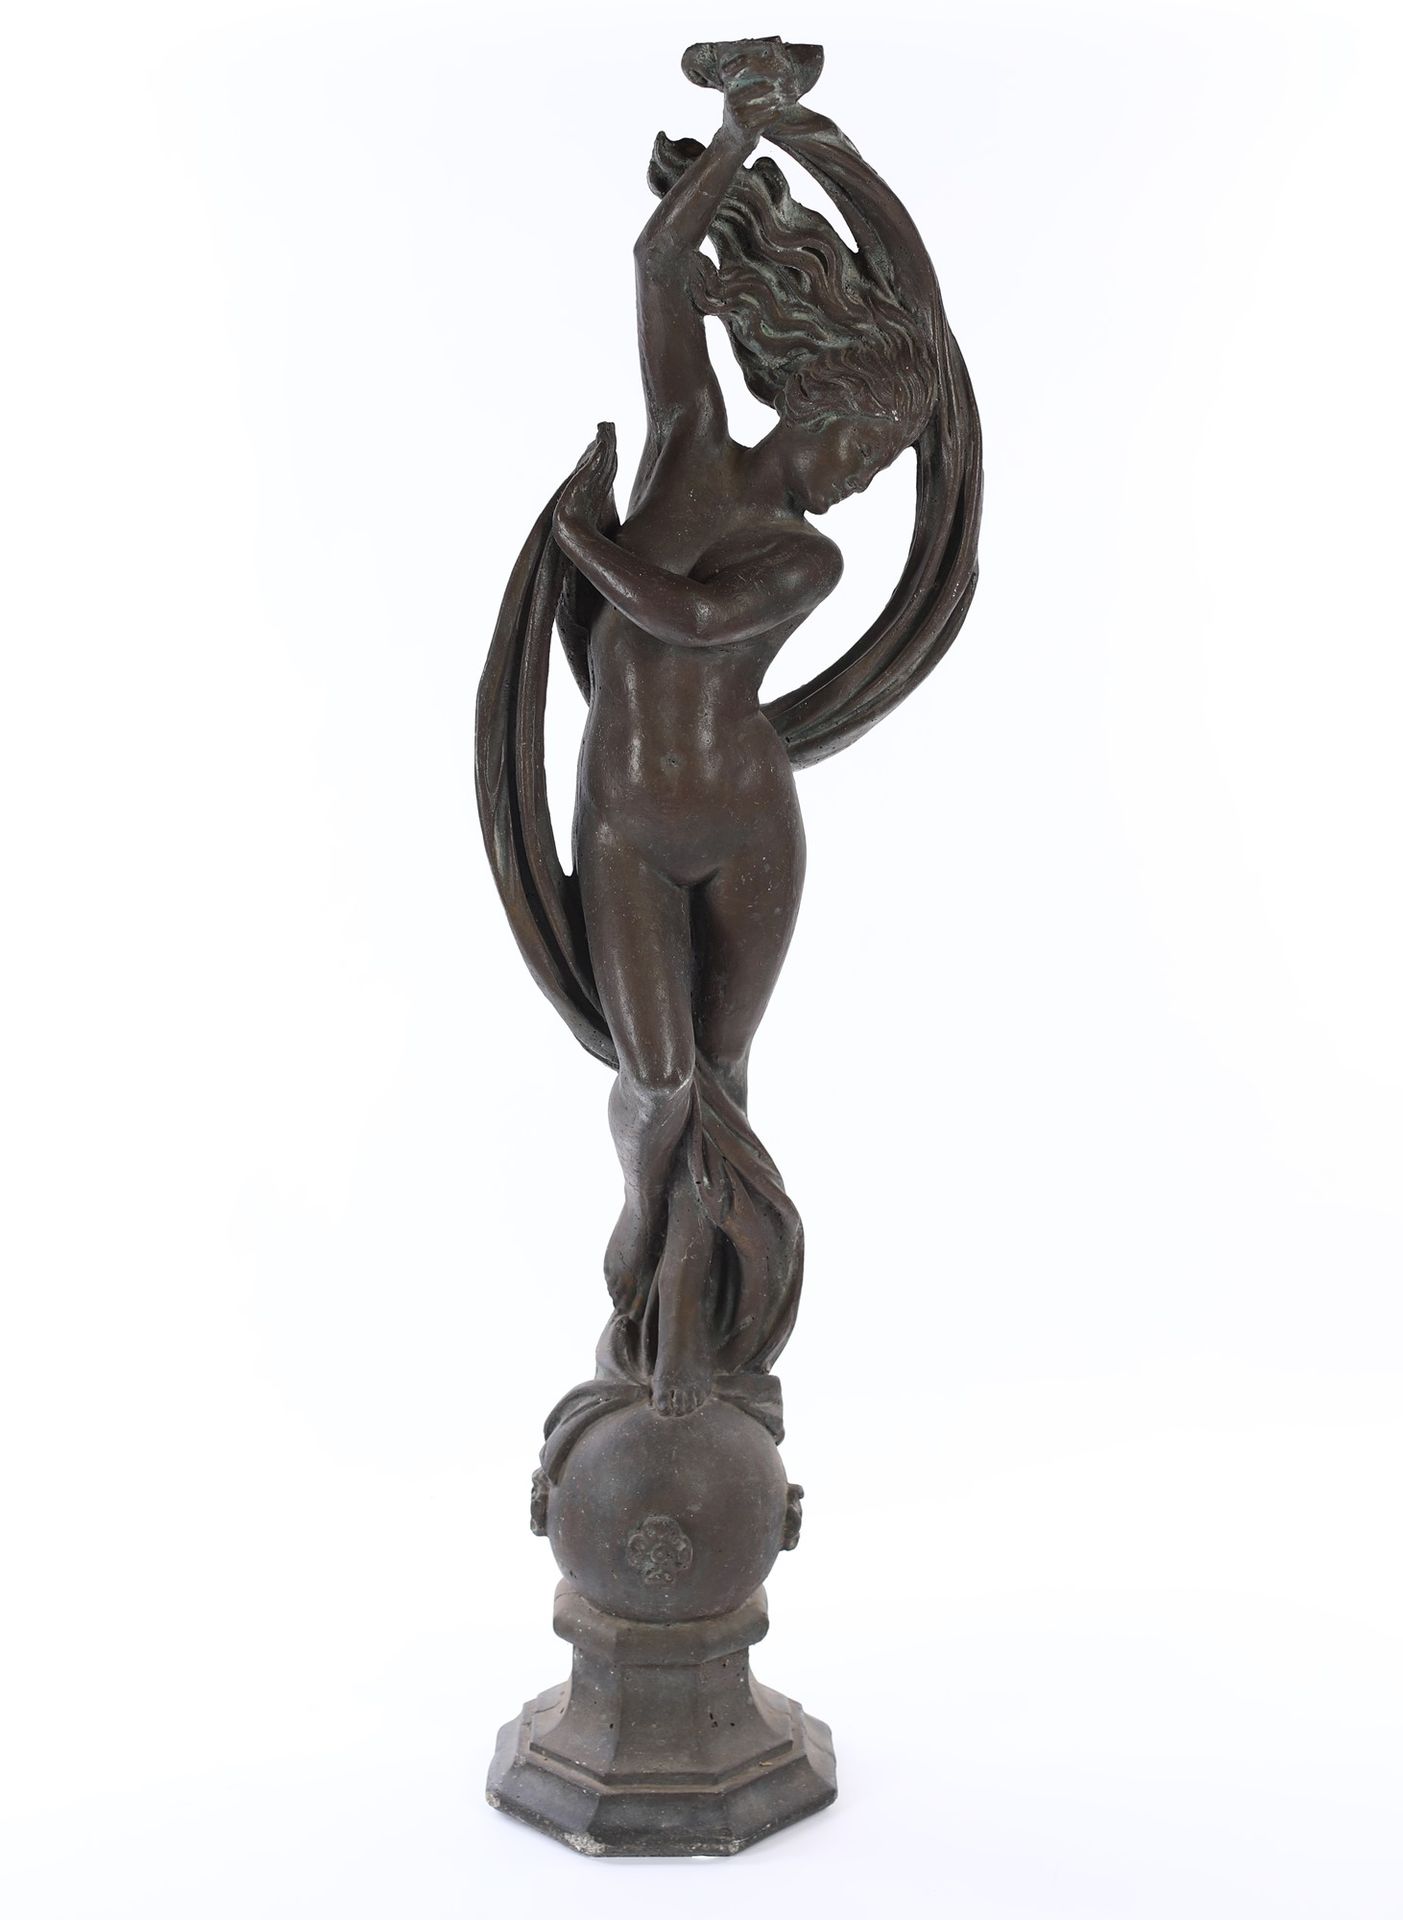 Cement statue depicting Naiad patinated in imitation of burnished bronze